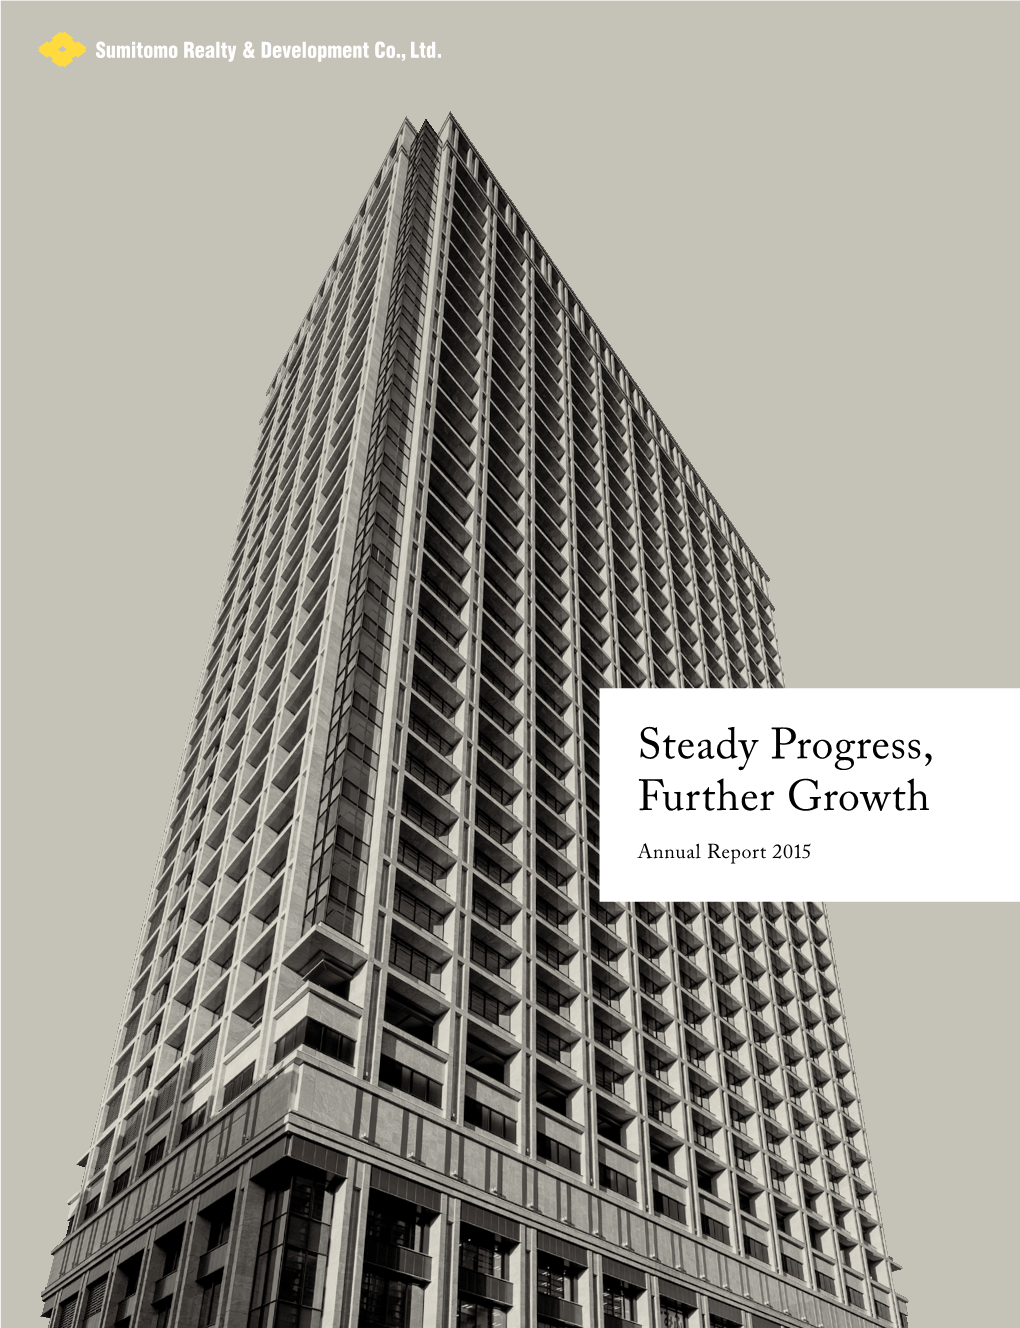 Steady Progress, Further Growth Annual Report 2015 Sumitomo Realty’S Track Record